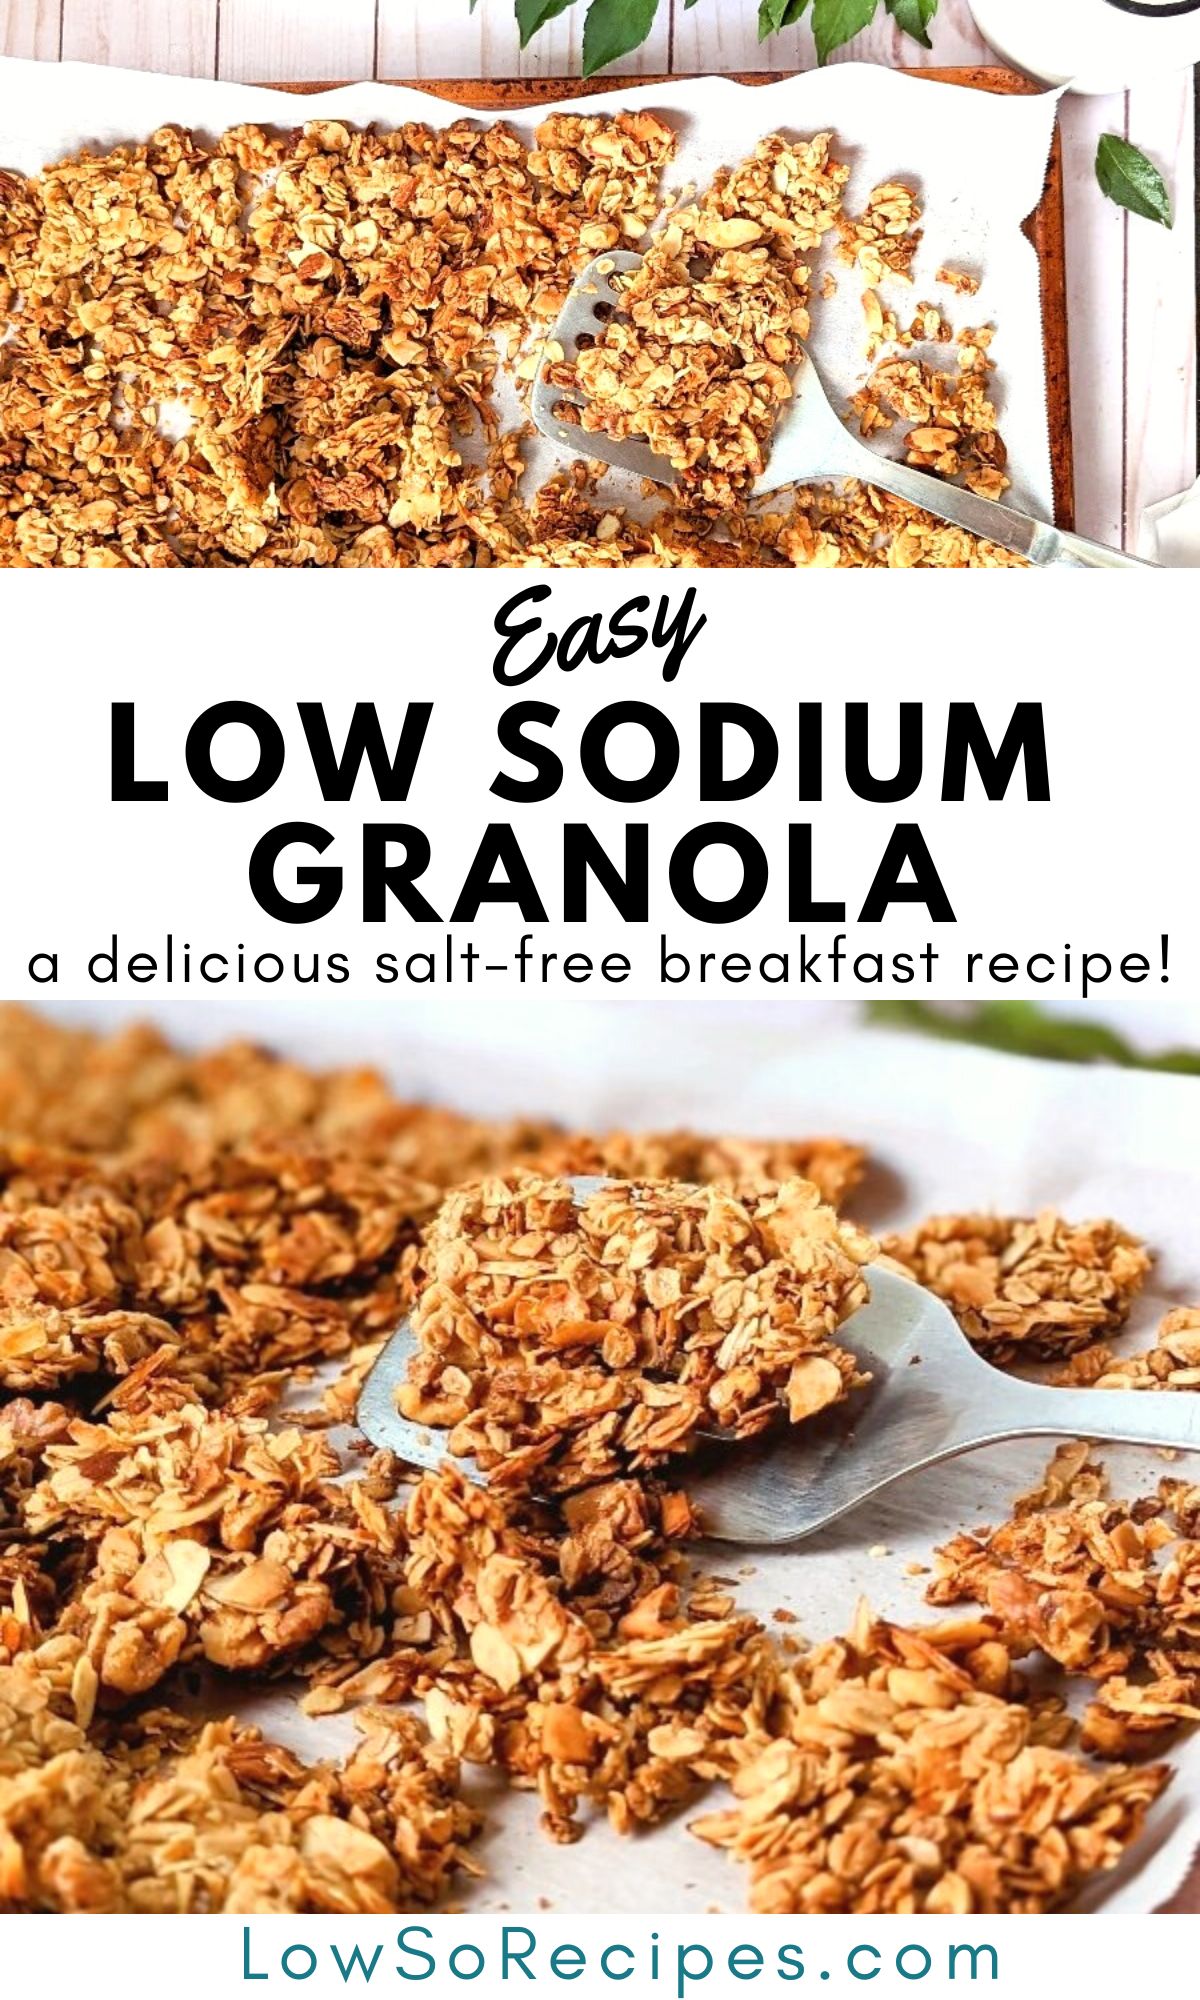 low sodium granola recipe healthy no salt breakfast recipes with oats nuts and natural sweeteners